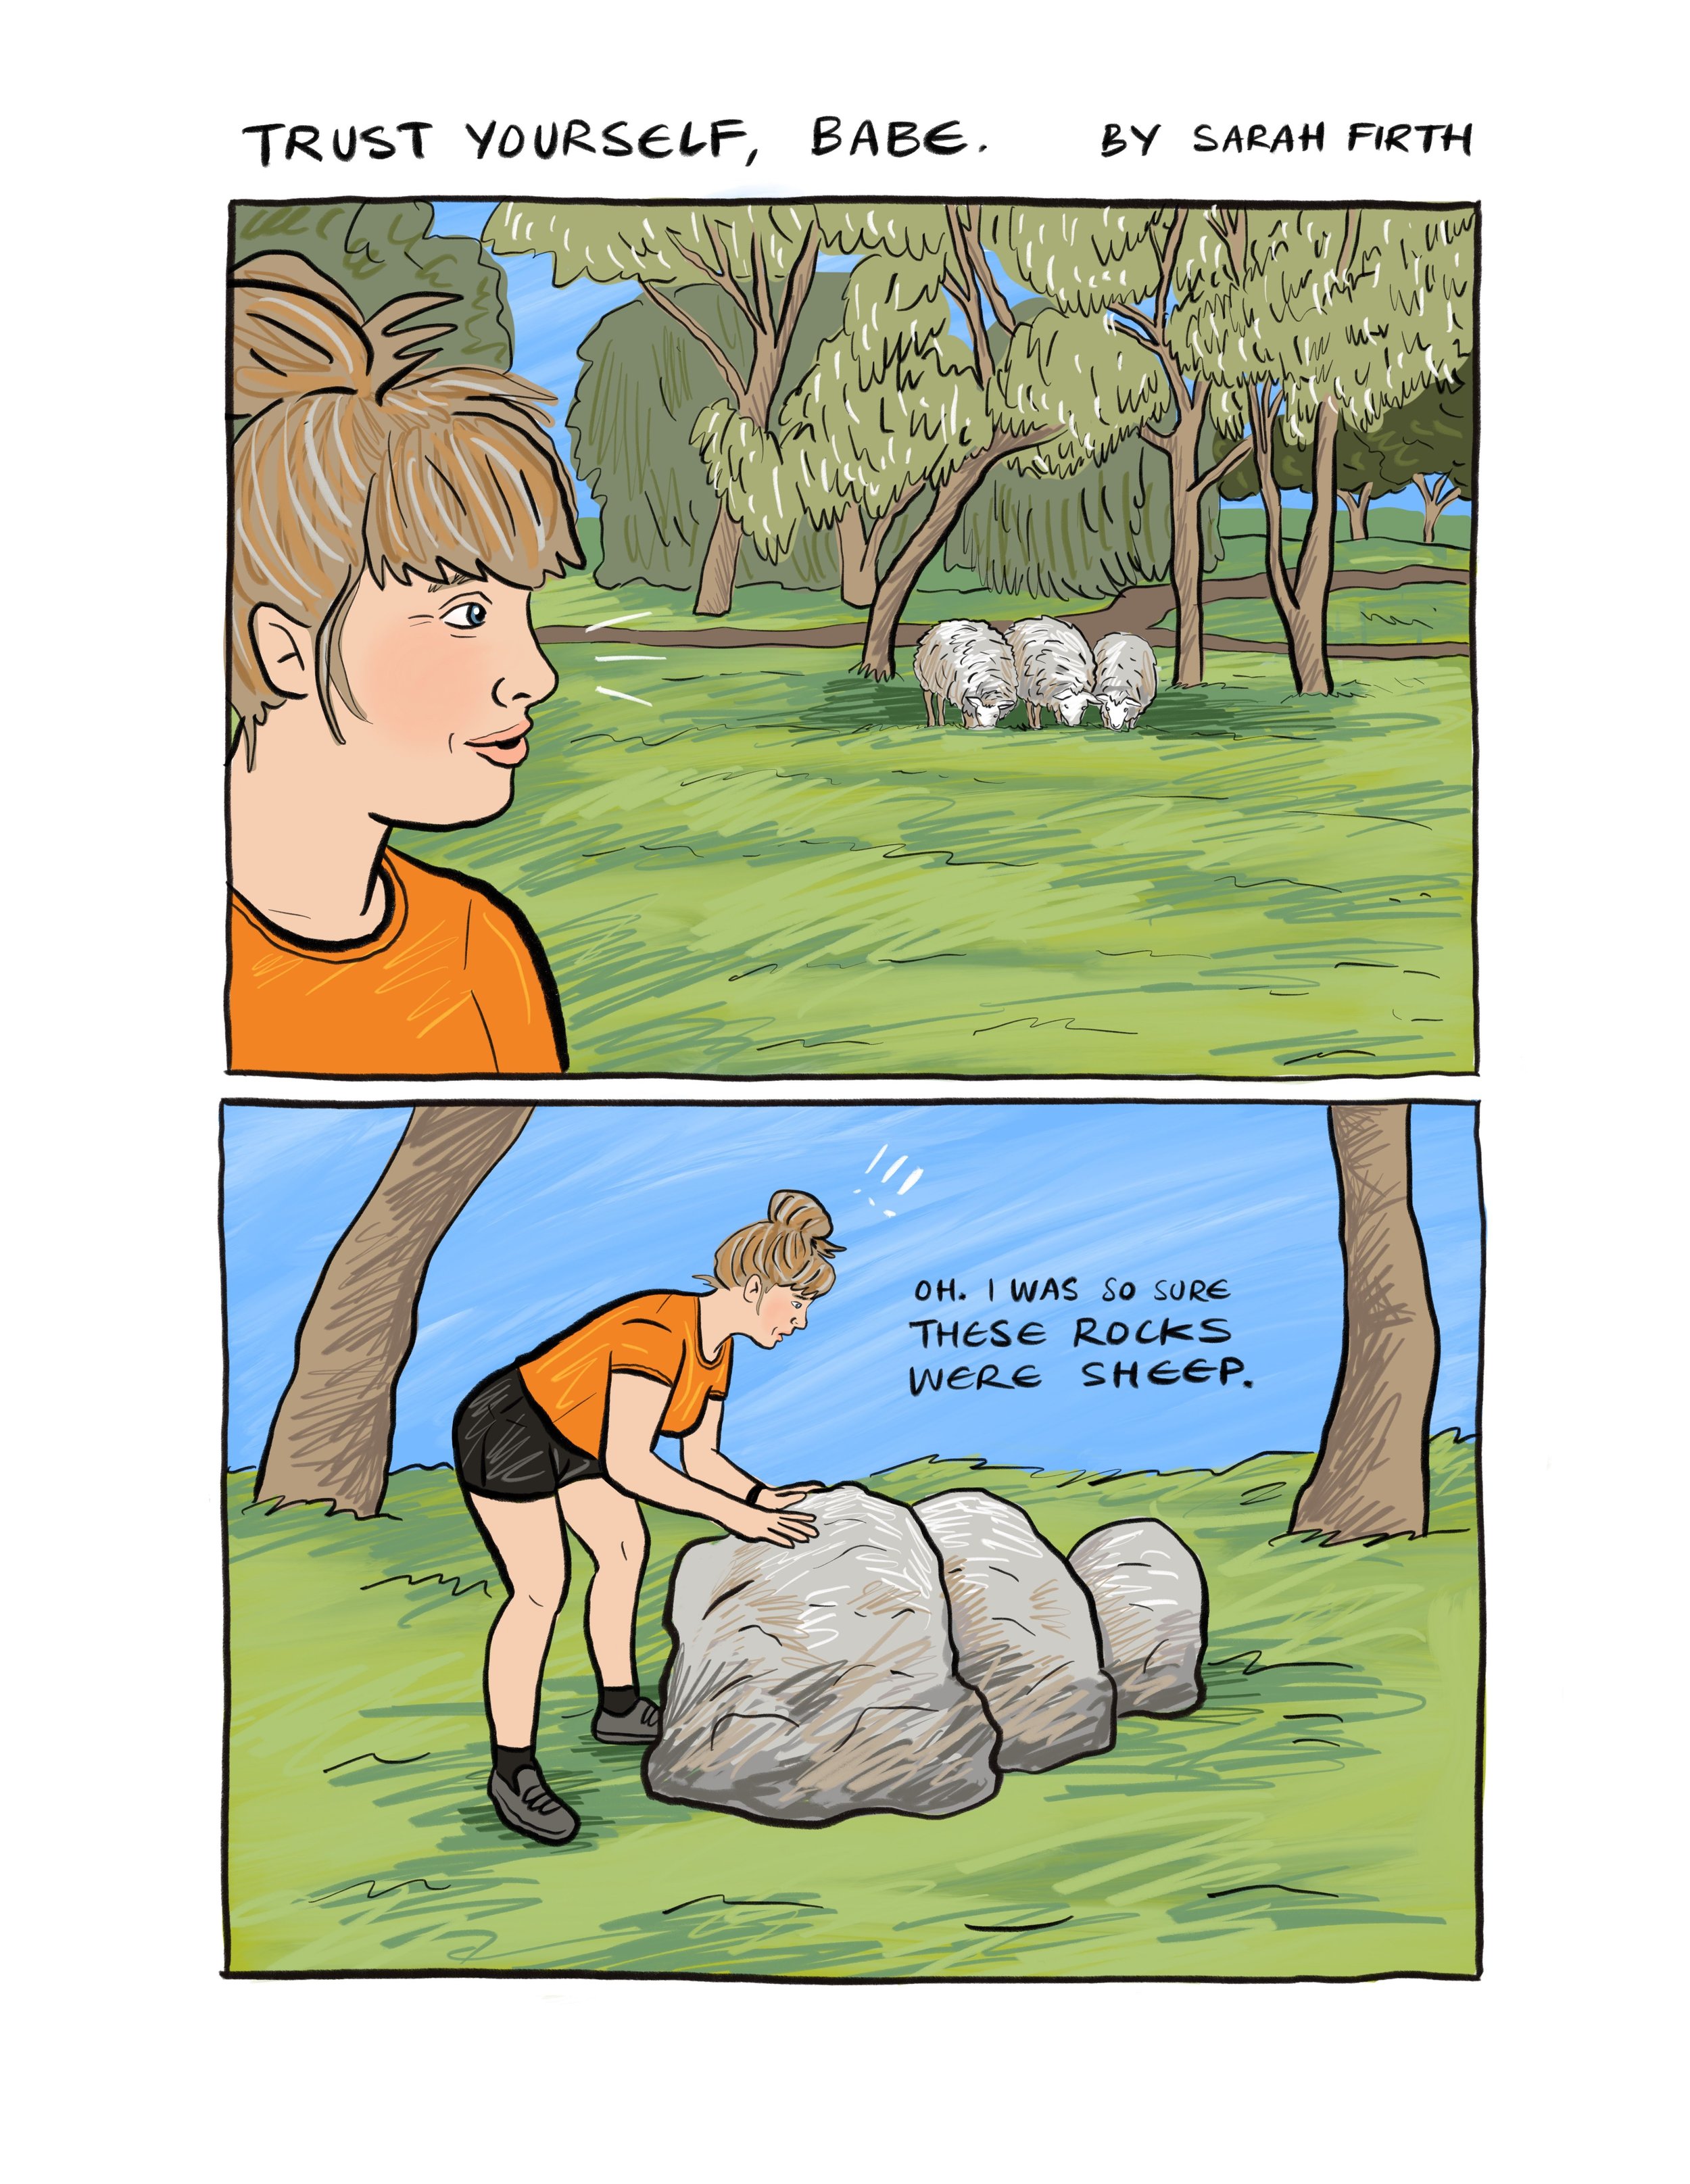 In the first image, a woman looks at sheep in the park. In the second image, she is closer and realises they are rocks. She says, "Oh, I was so sure these were sheep."